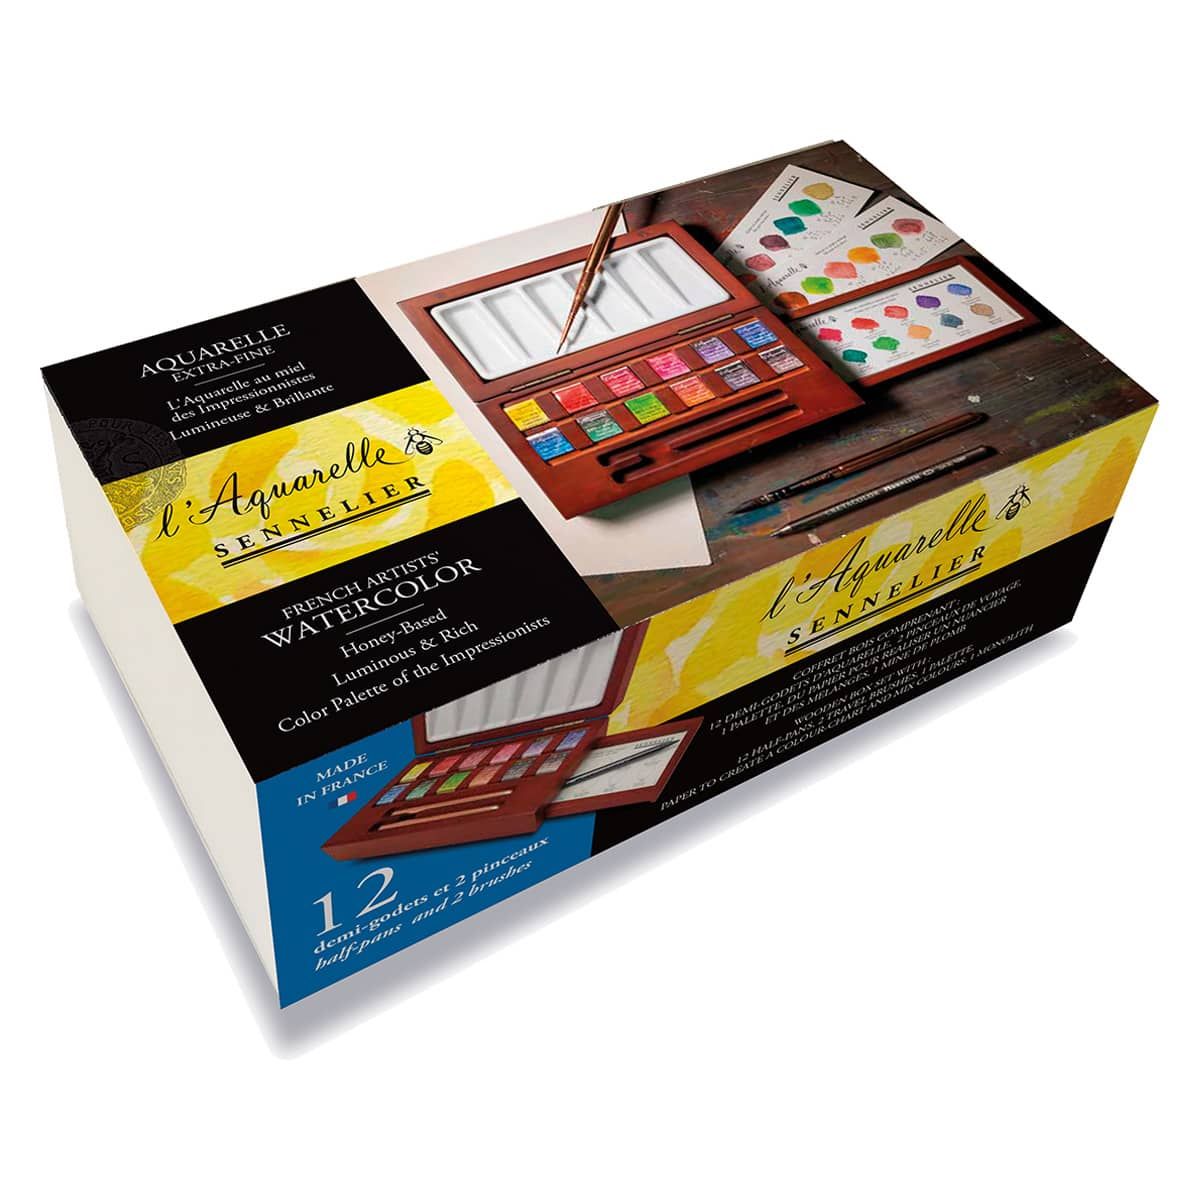 Sennelier French Artists' Watercolor Sets, 98-Color Complete Wood Set -  Endeavours ThinkPlay